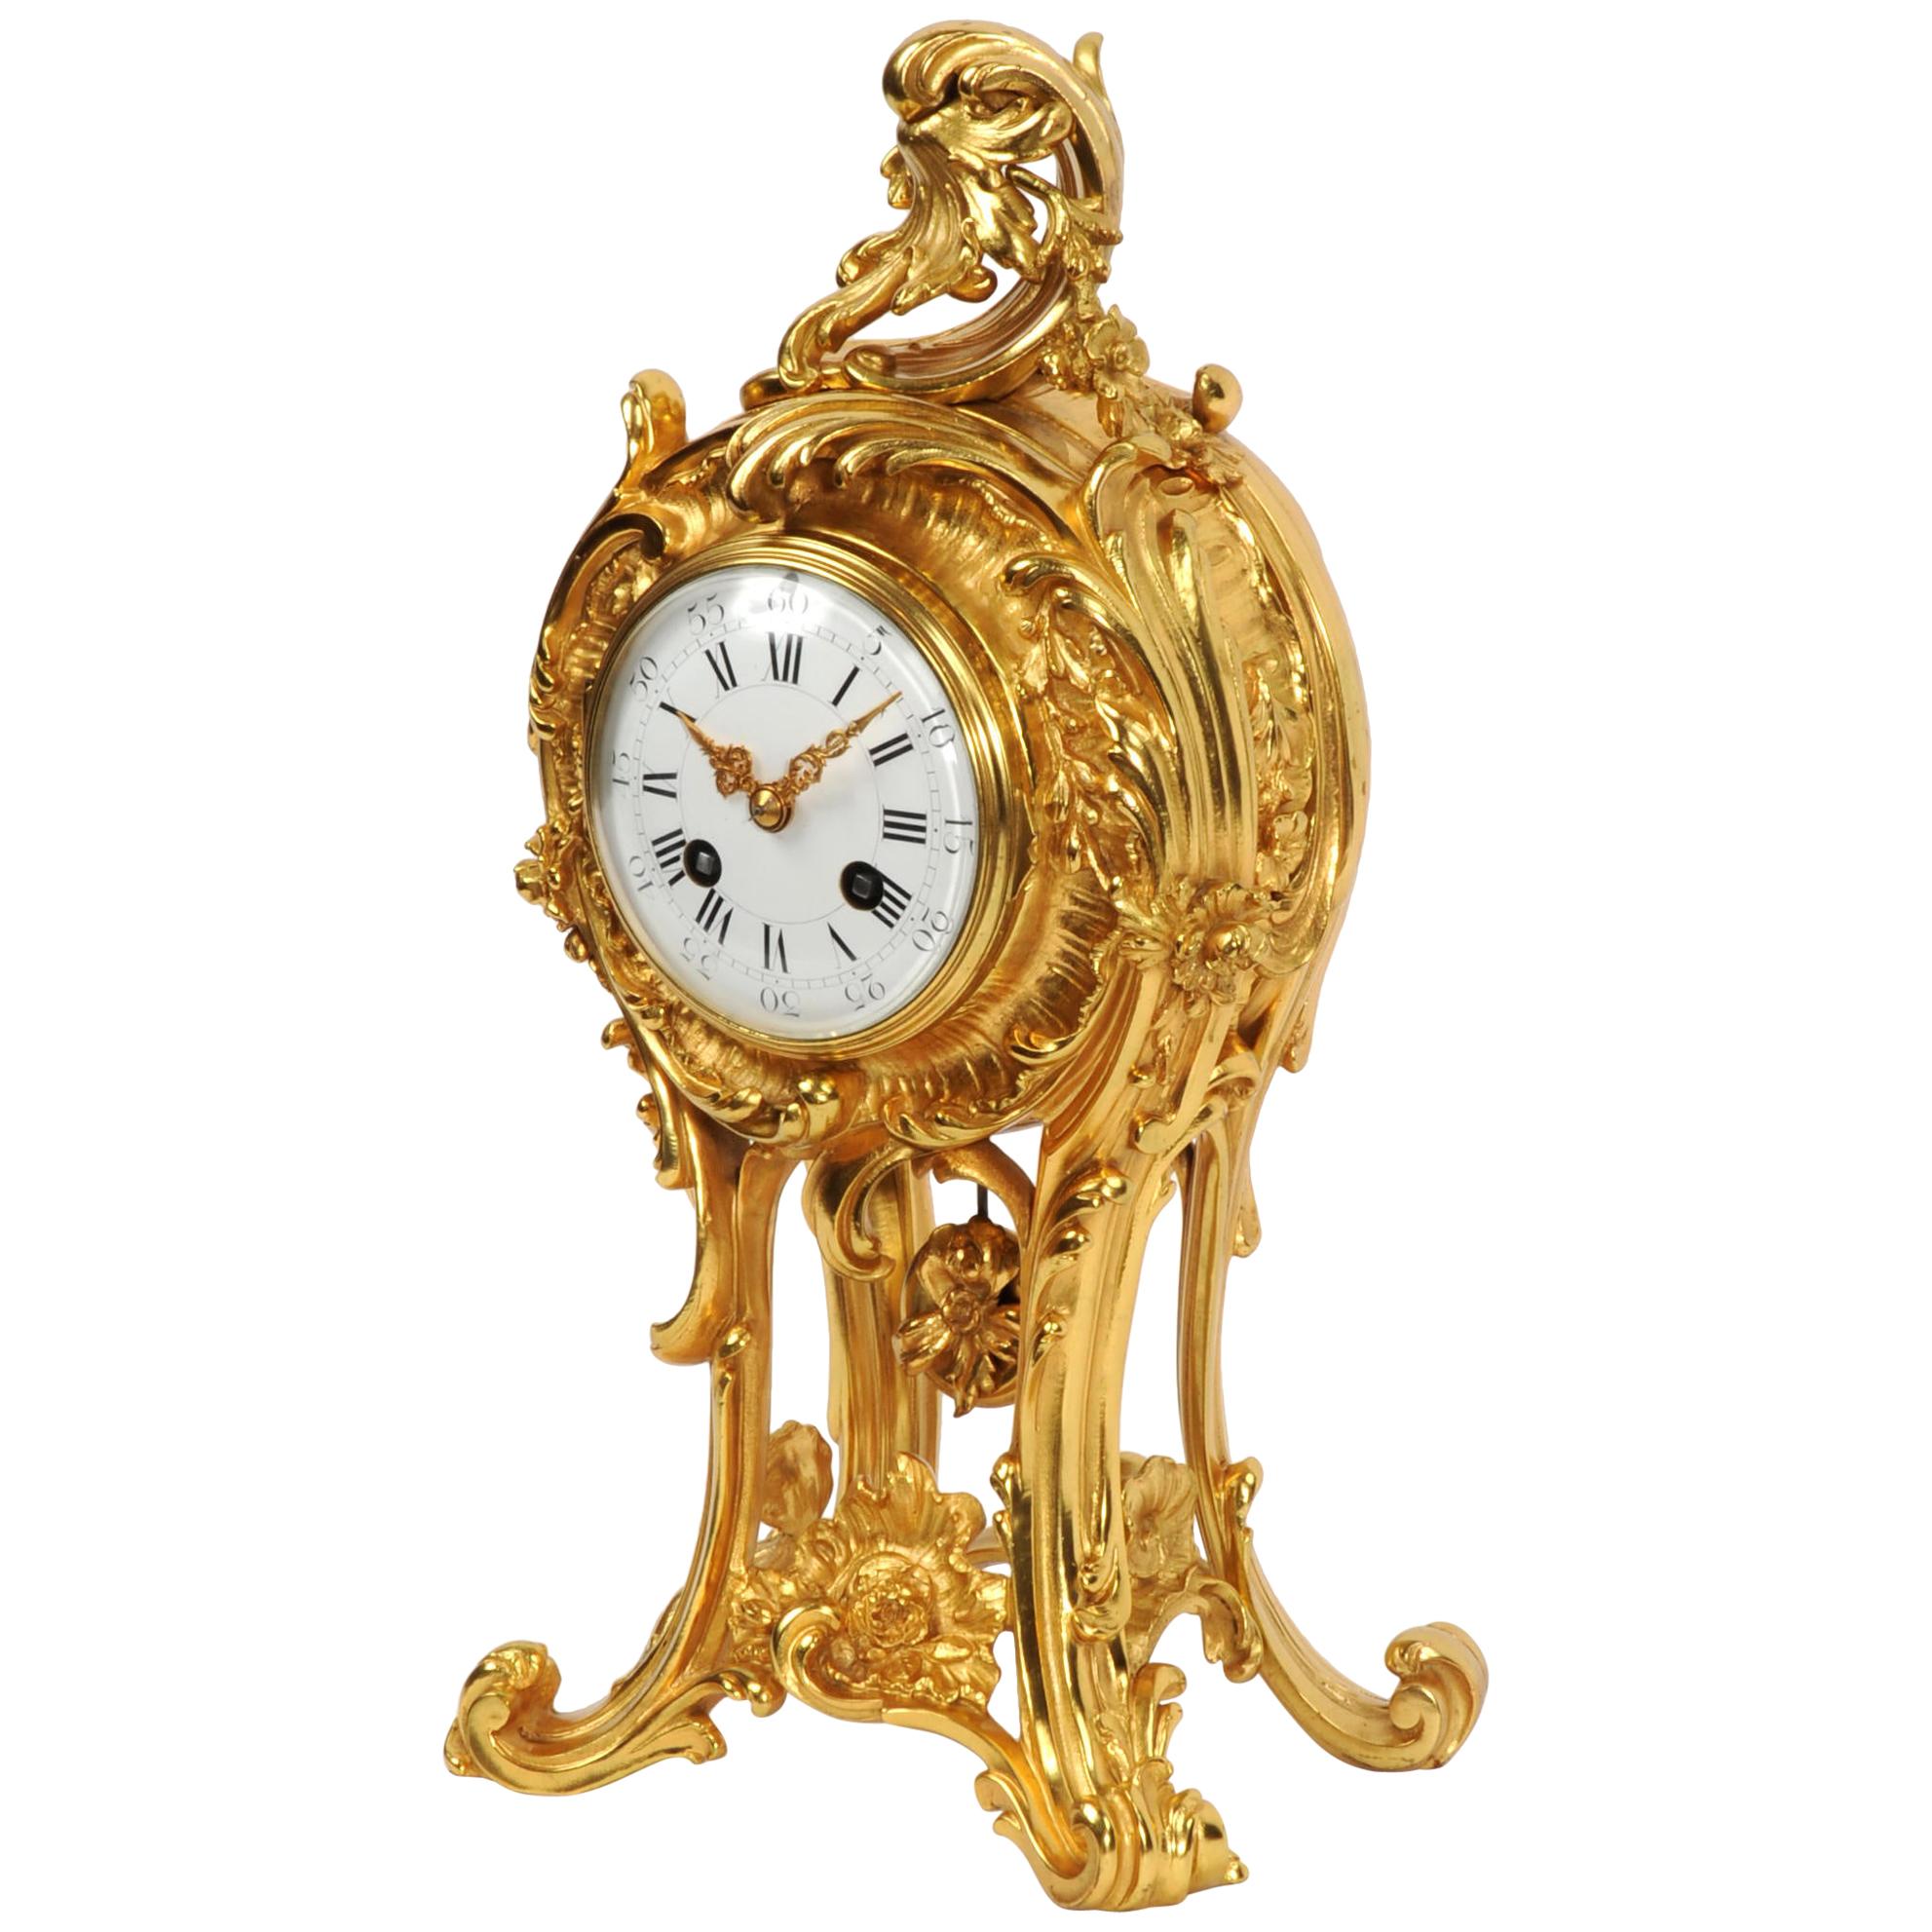 Superb Antique French Rococo Ormolu Clock with Visible Pendulum by Emile Colin